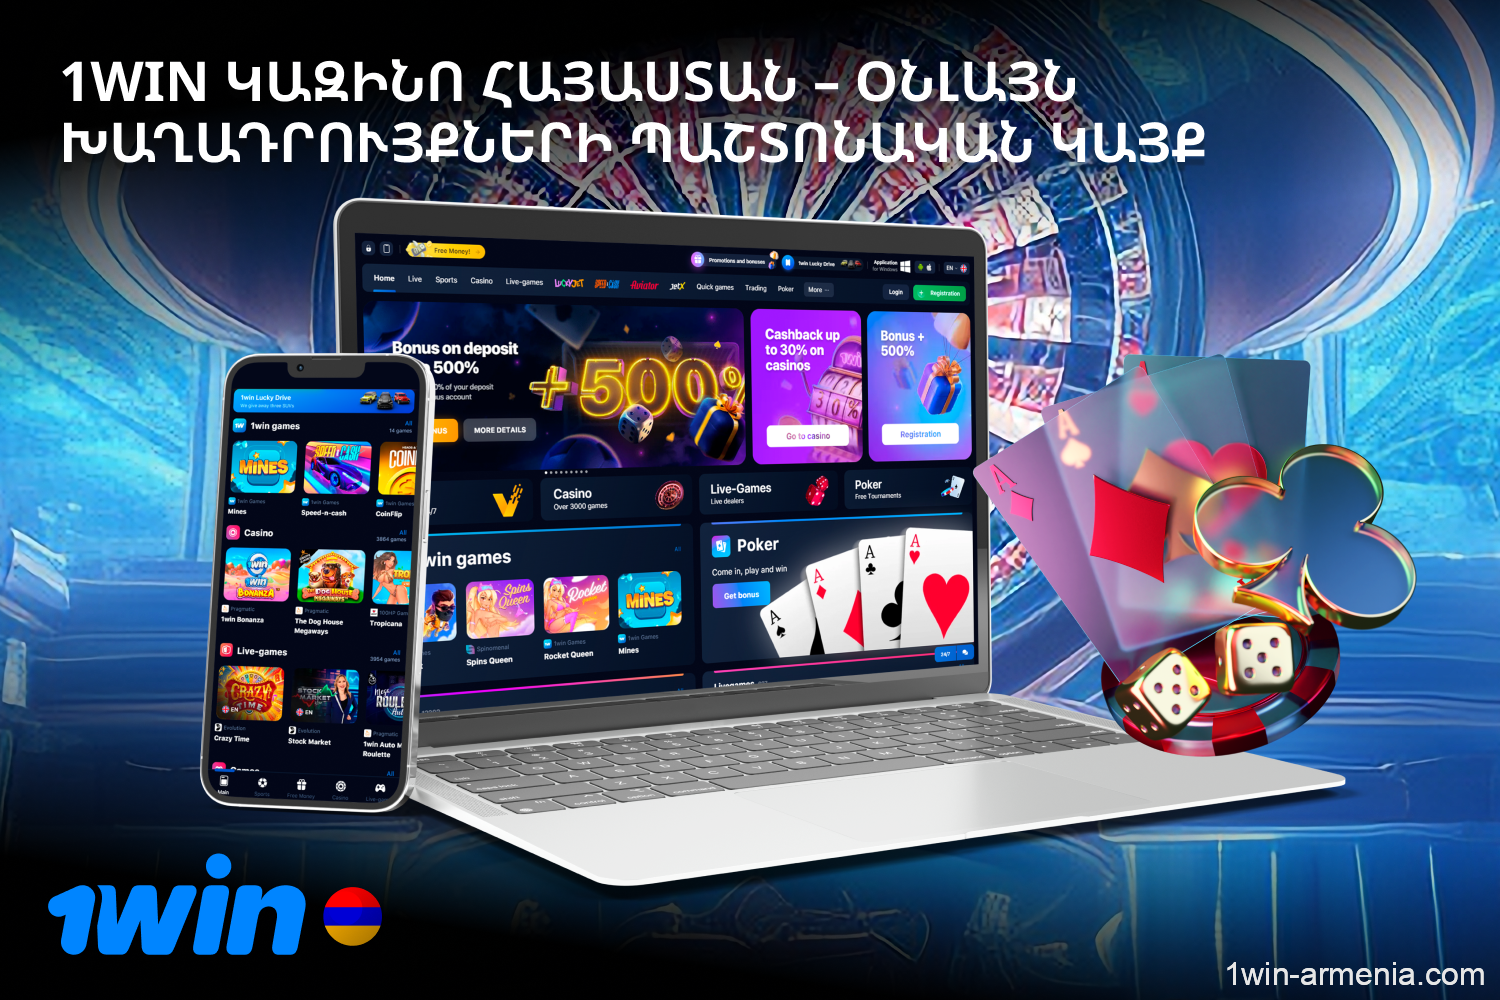 1win Armenia Casino offers a wide selection of sports betting and a large collection of casino games